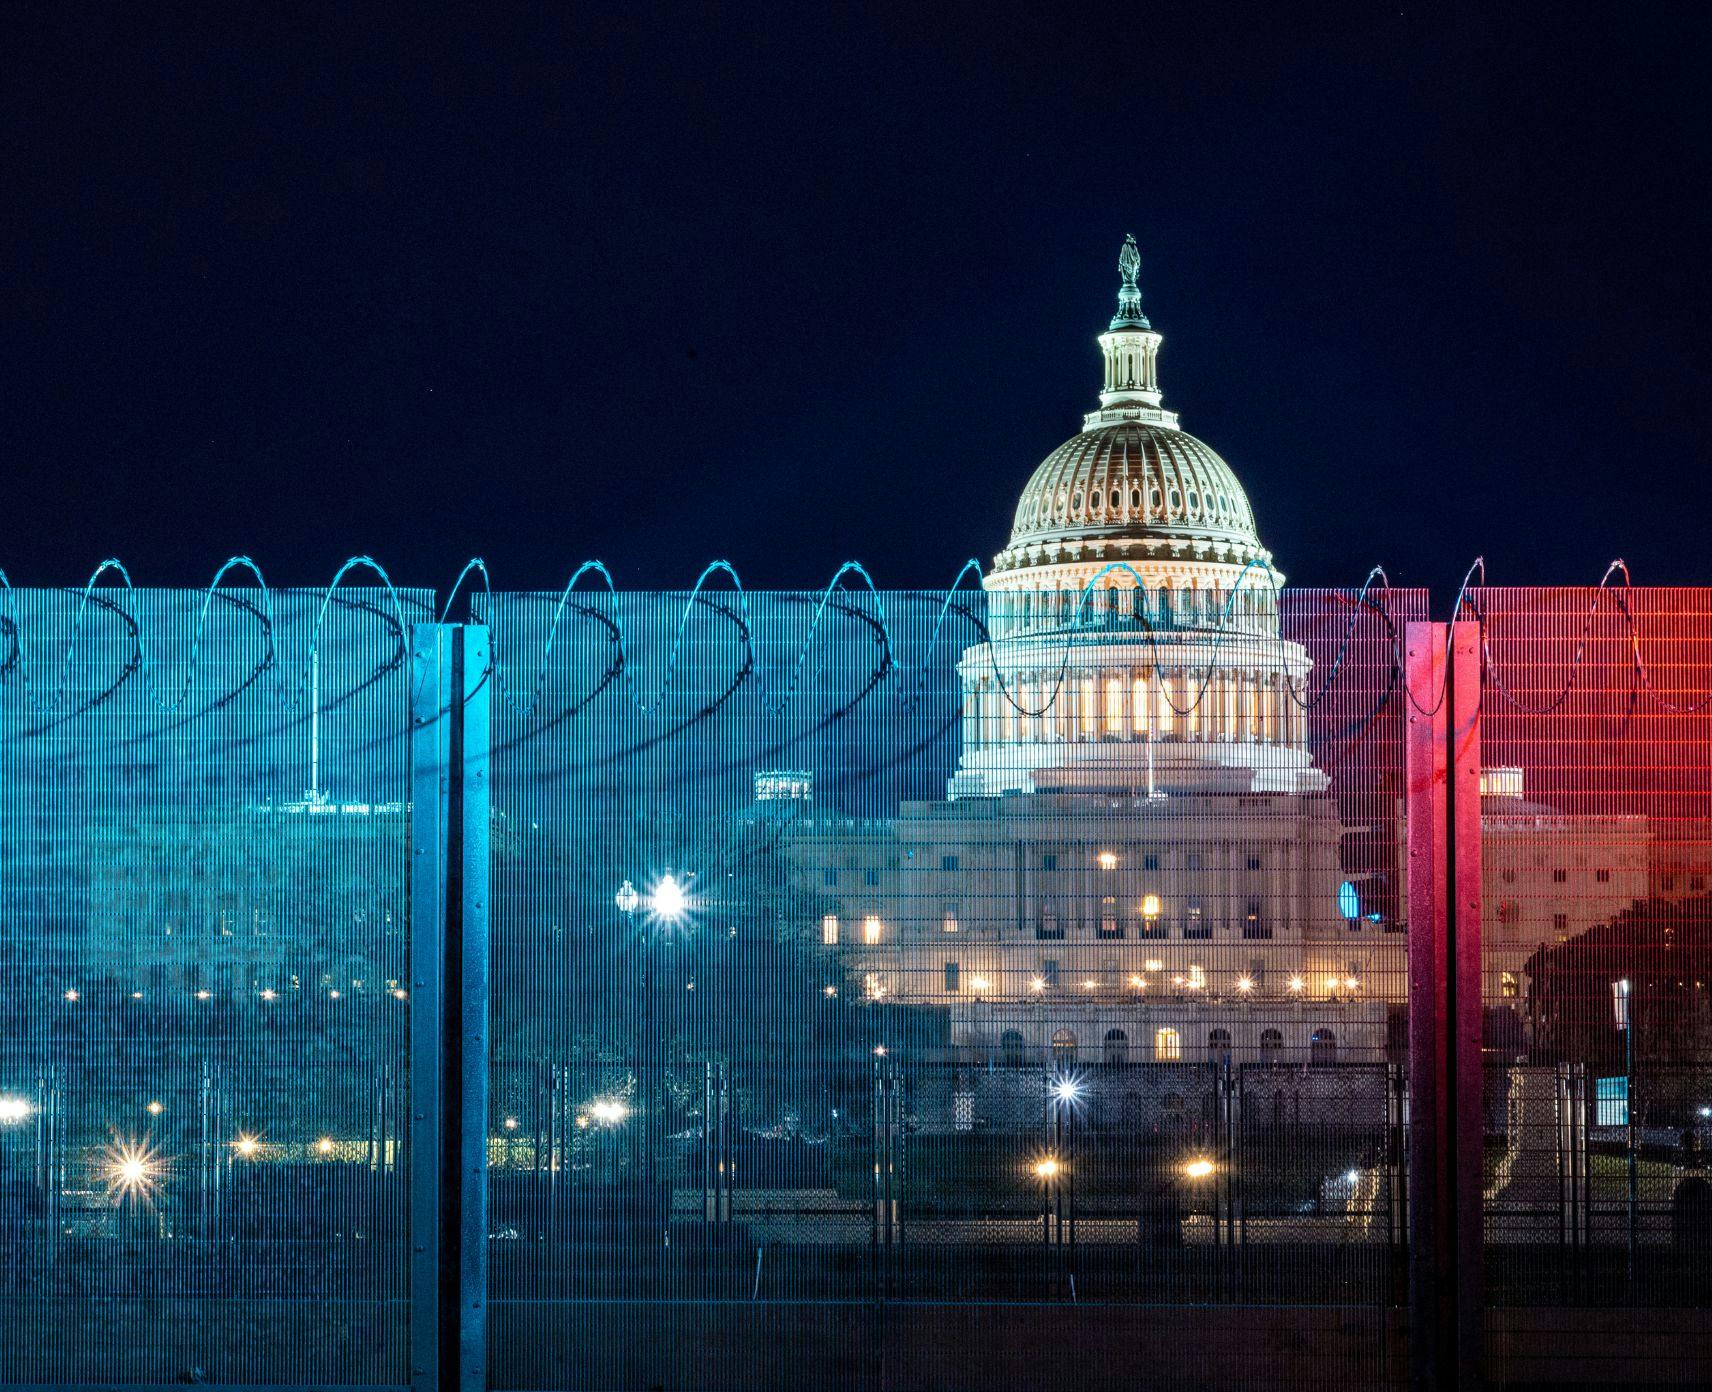 Security fence with blue and red light in front of the United States Capitol